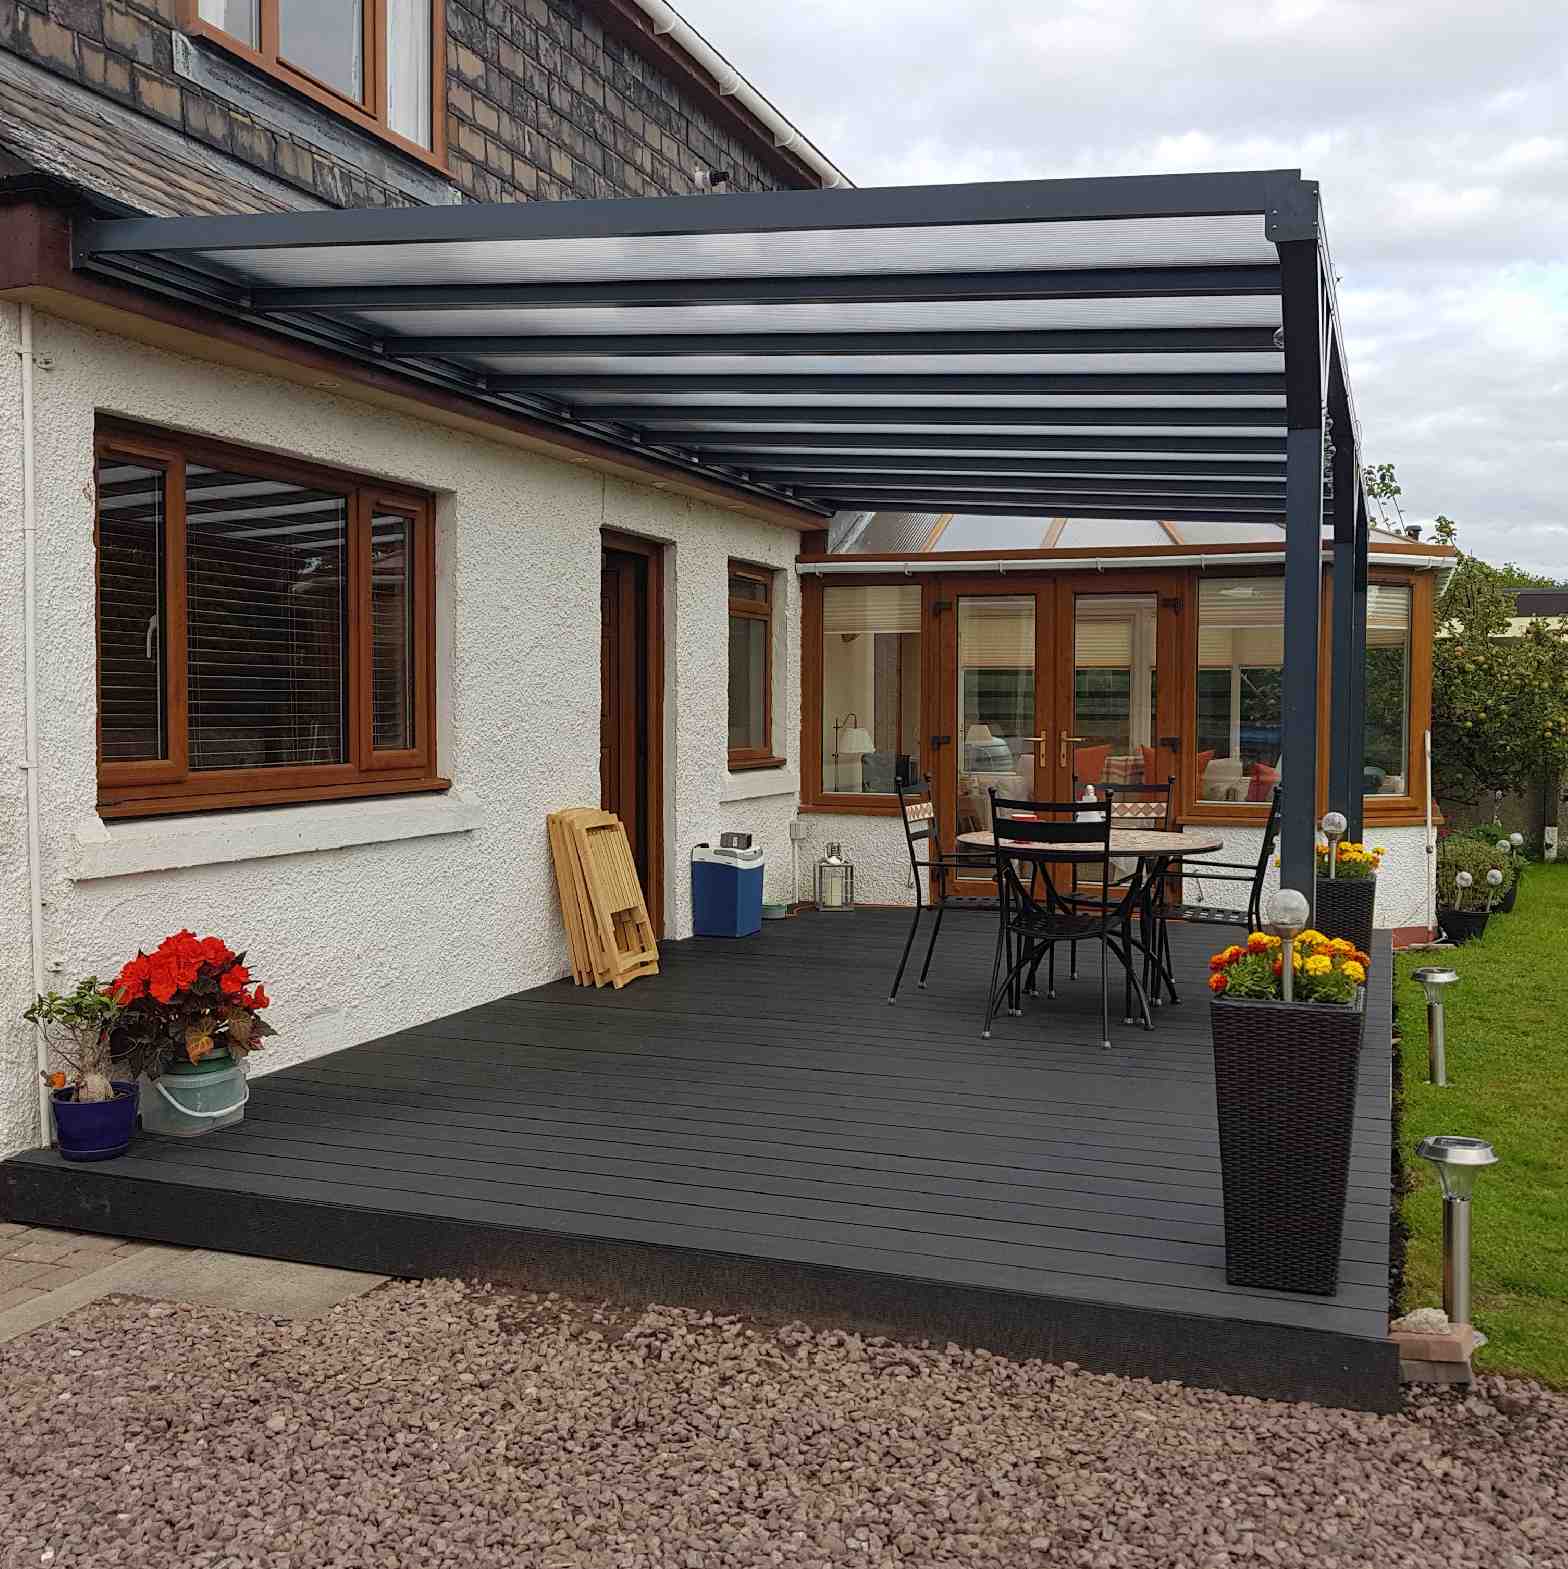 Buy Omega Verandah, Anthracite Grey, 16mm Polycarbonate Glazing - 7.4m (W) x 3.0m (P), (4) Supporting Posts online today